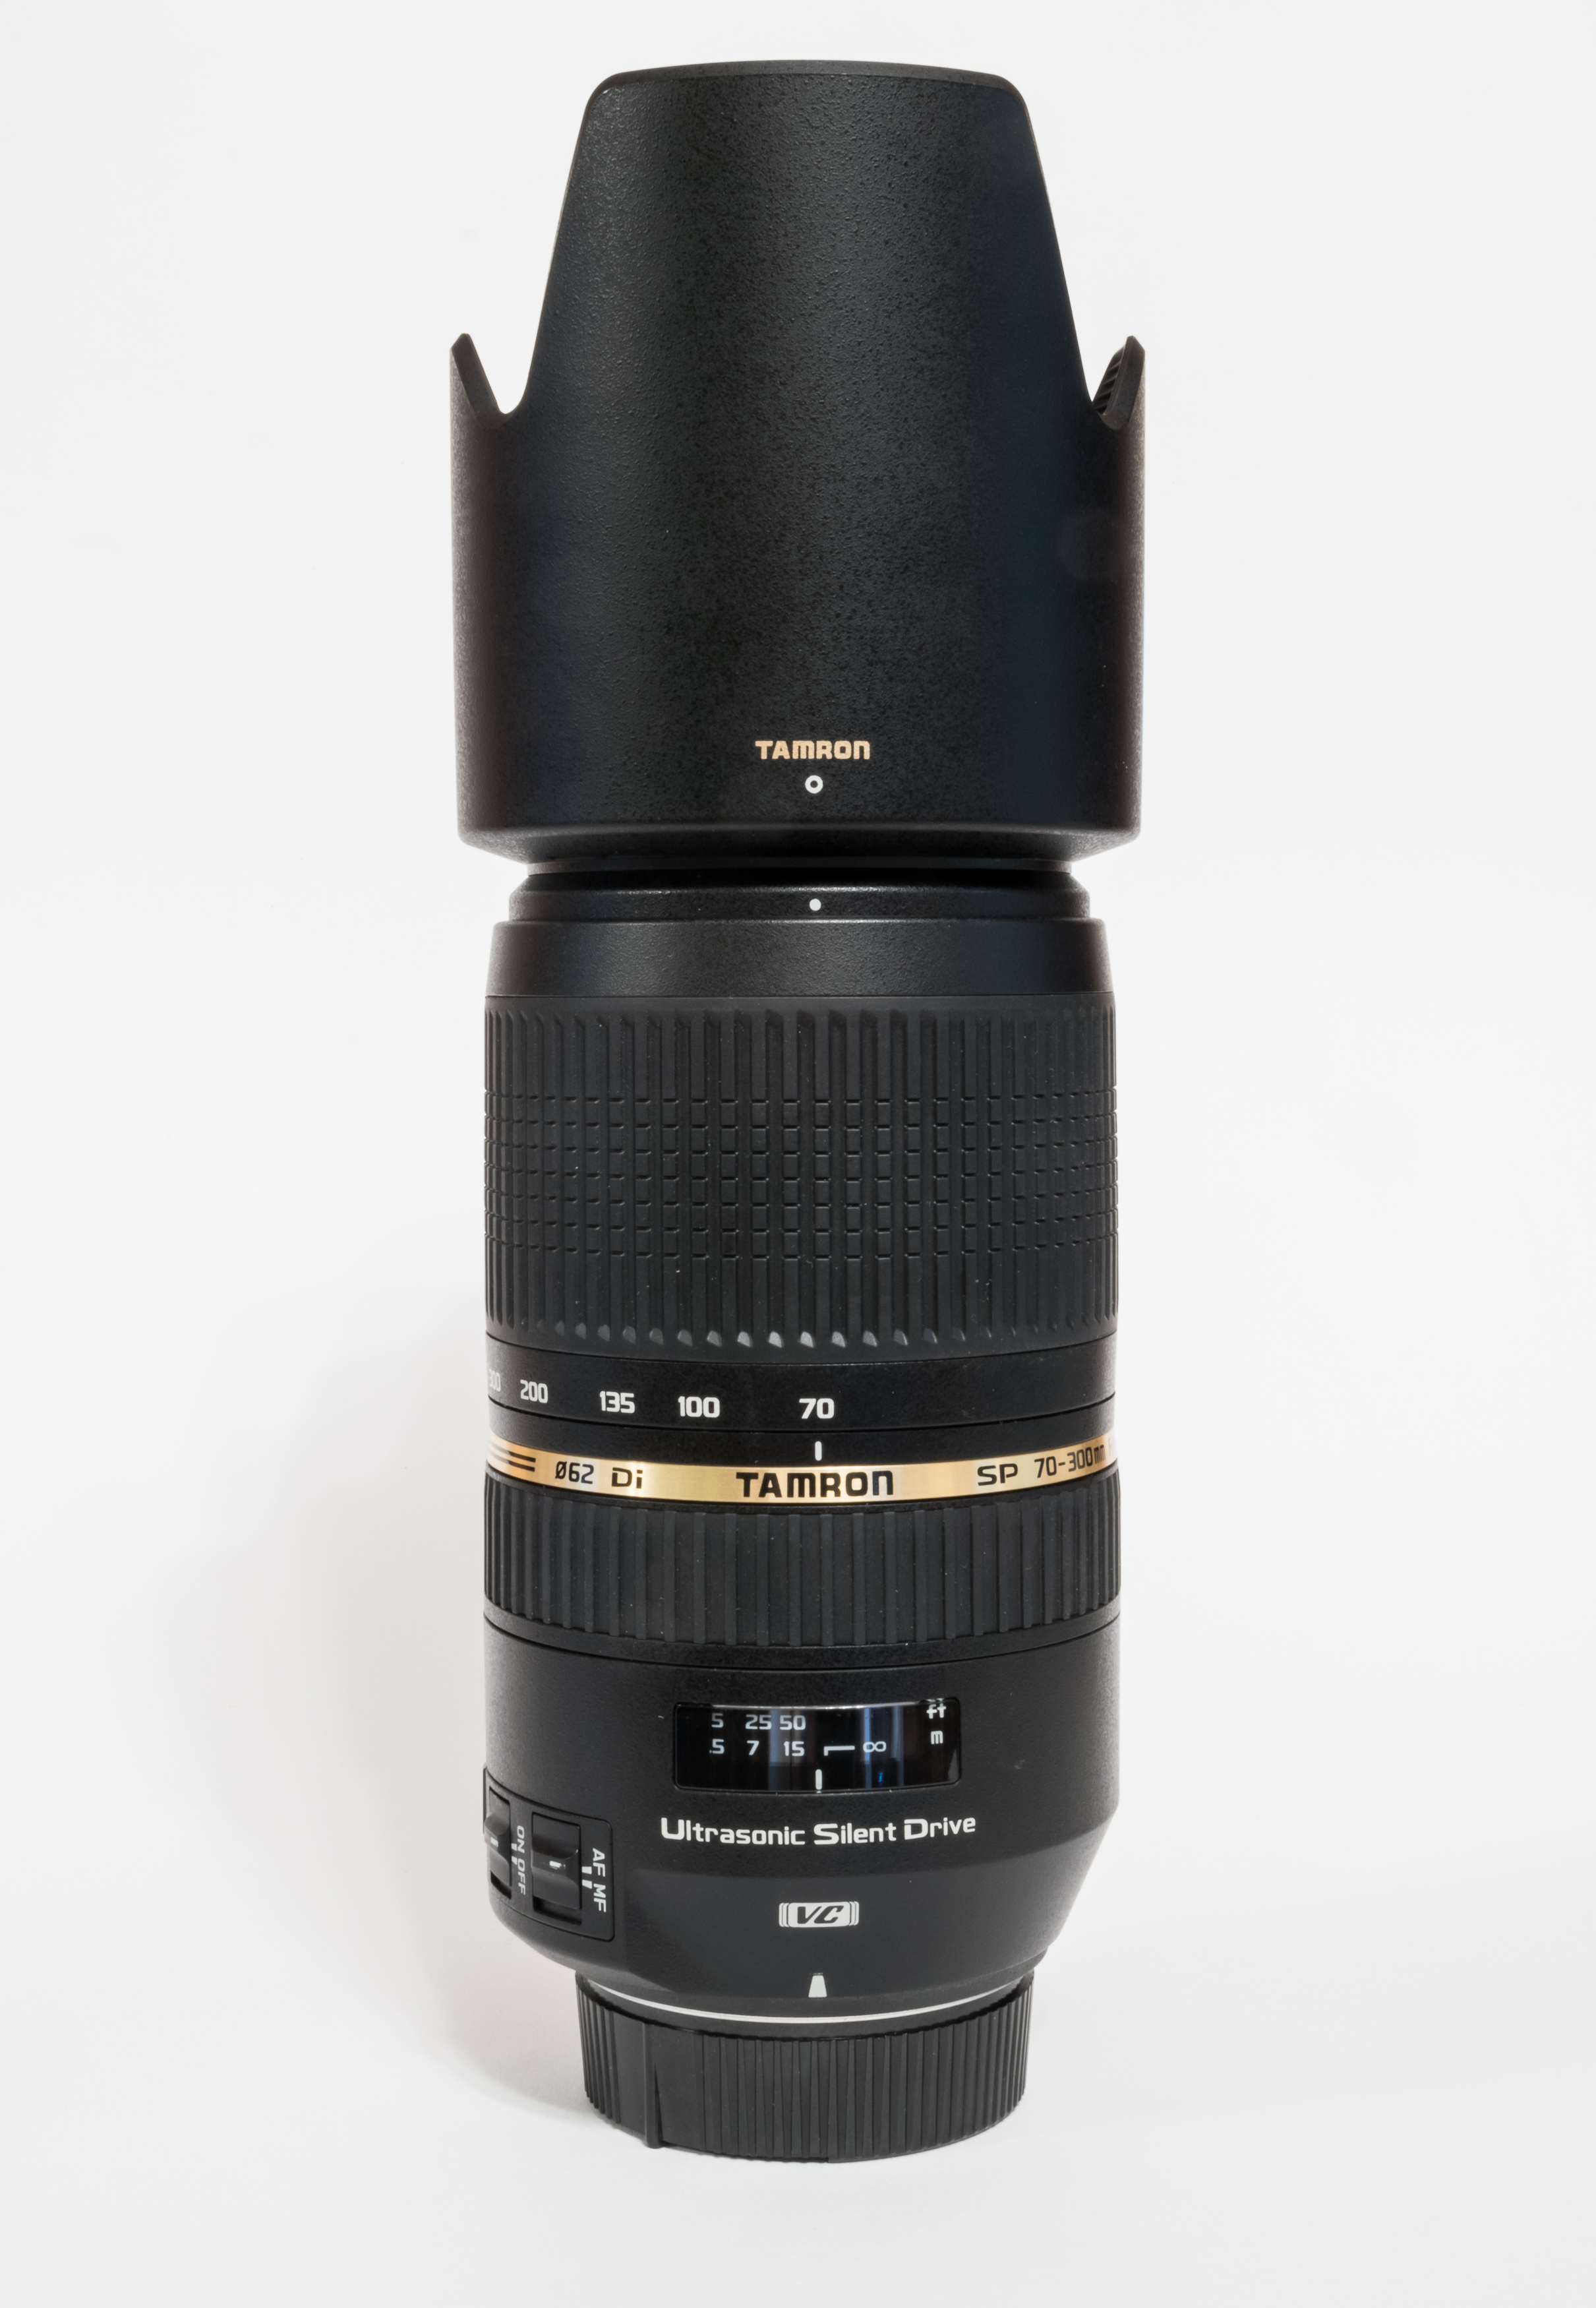 File:Tamron AF 70-300mm 4-5.6 Di SP VC USD - 2015-08-28 (4)-HDR.jpg -  Wikimedia Commons